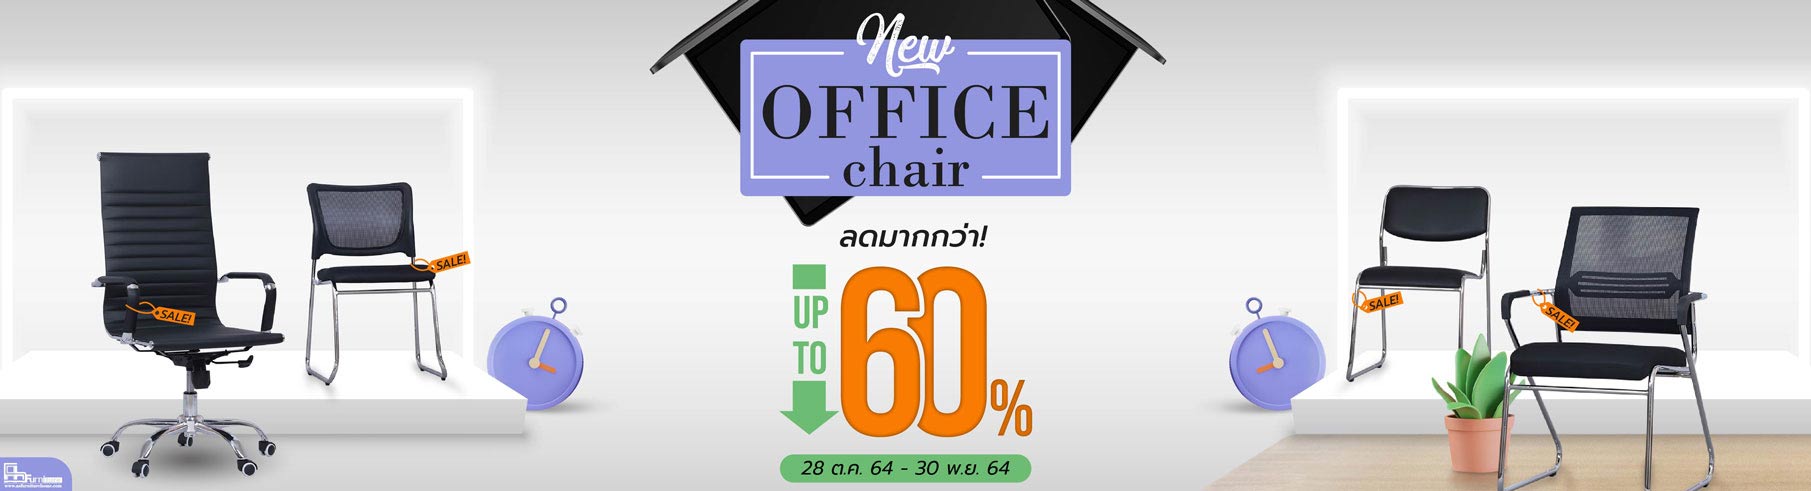 New-Office-Chair-WB-03